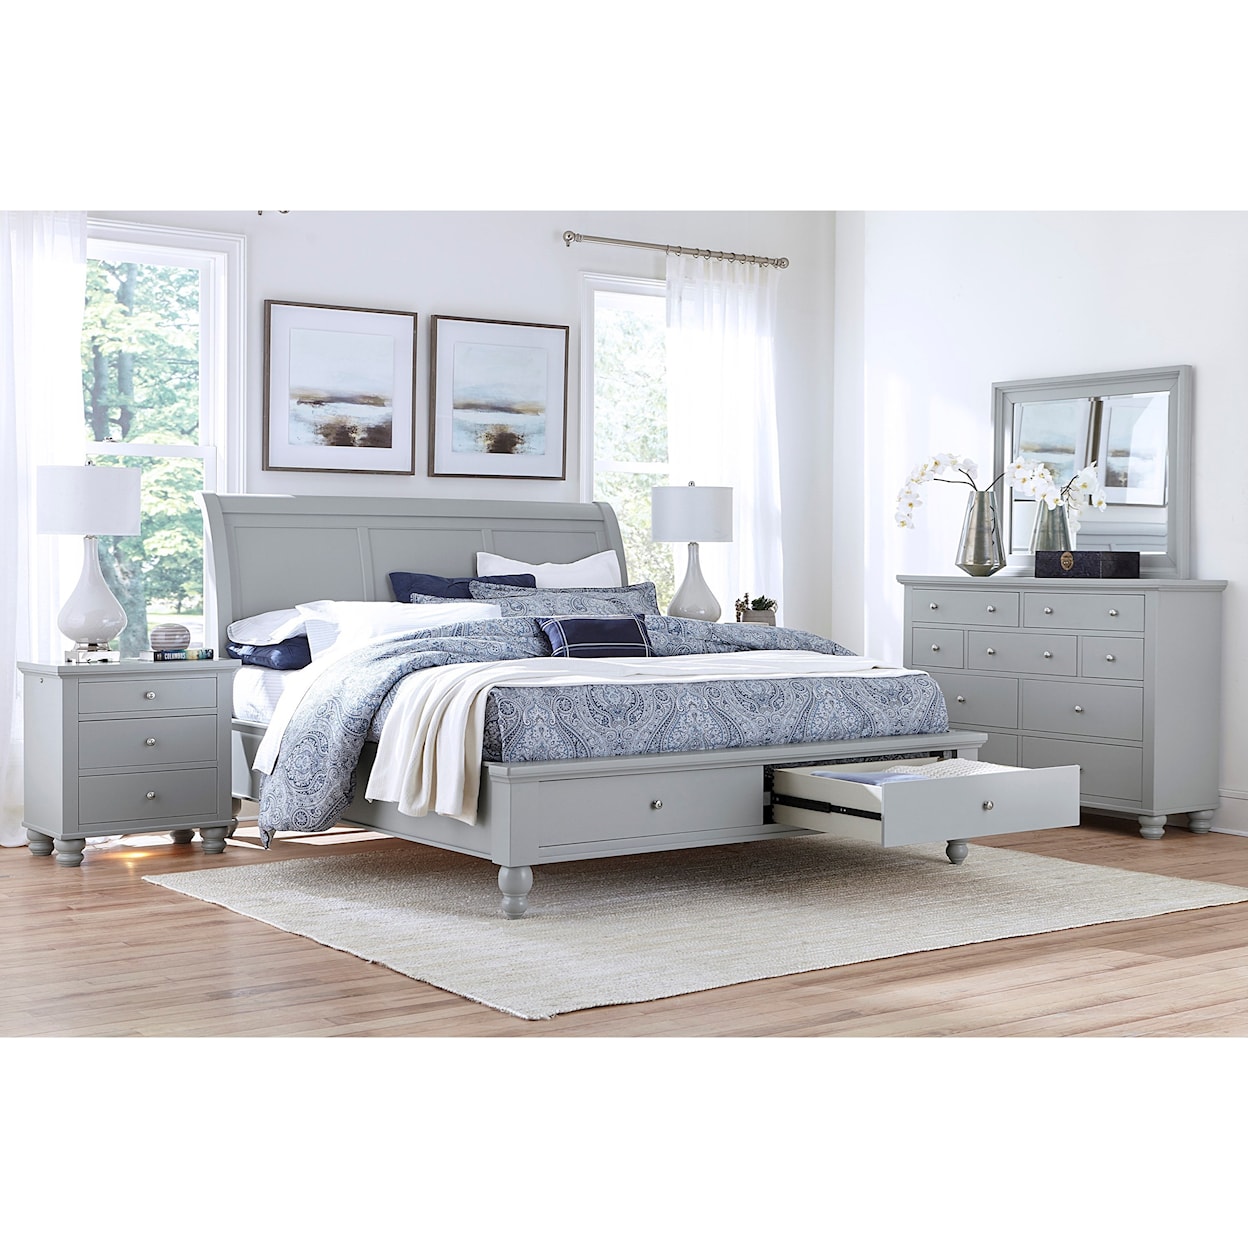 Aspenhome Cambridge CHY King Sleigh Bed With Storage Drawers